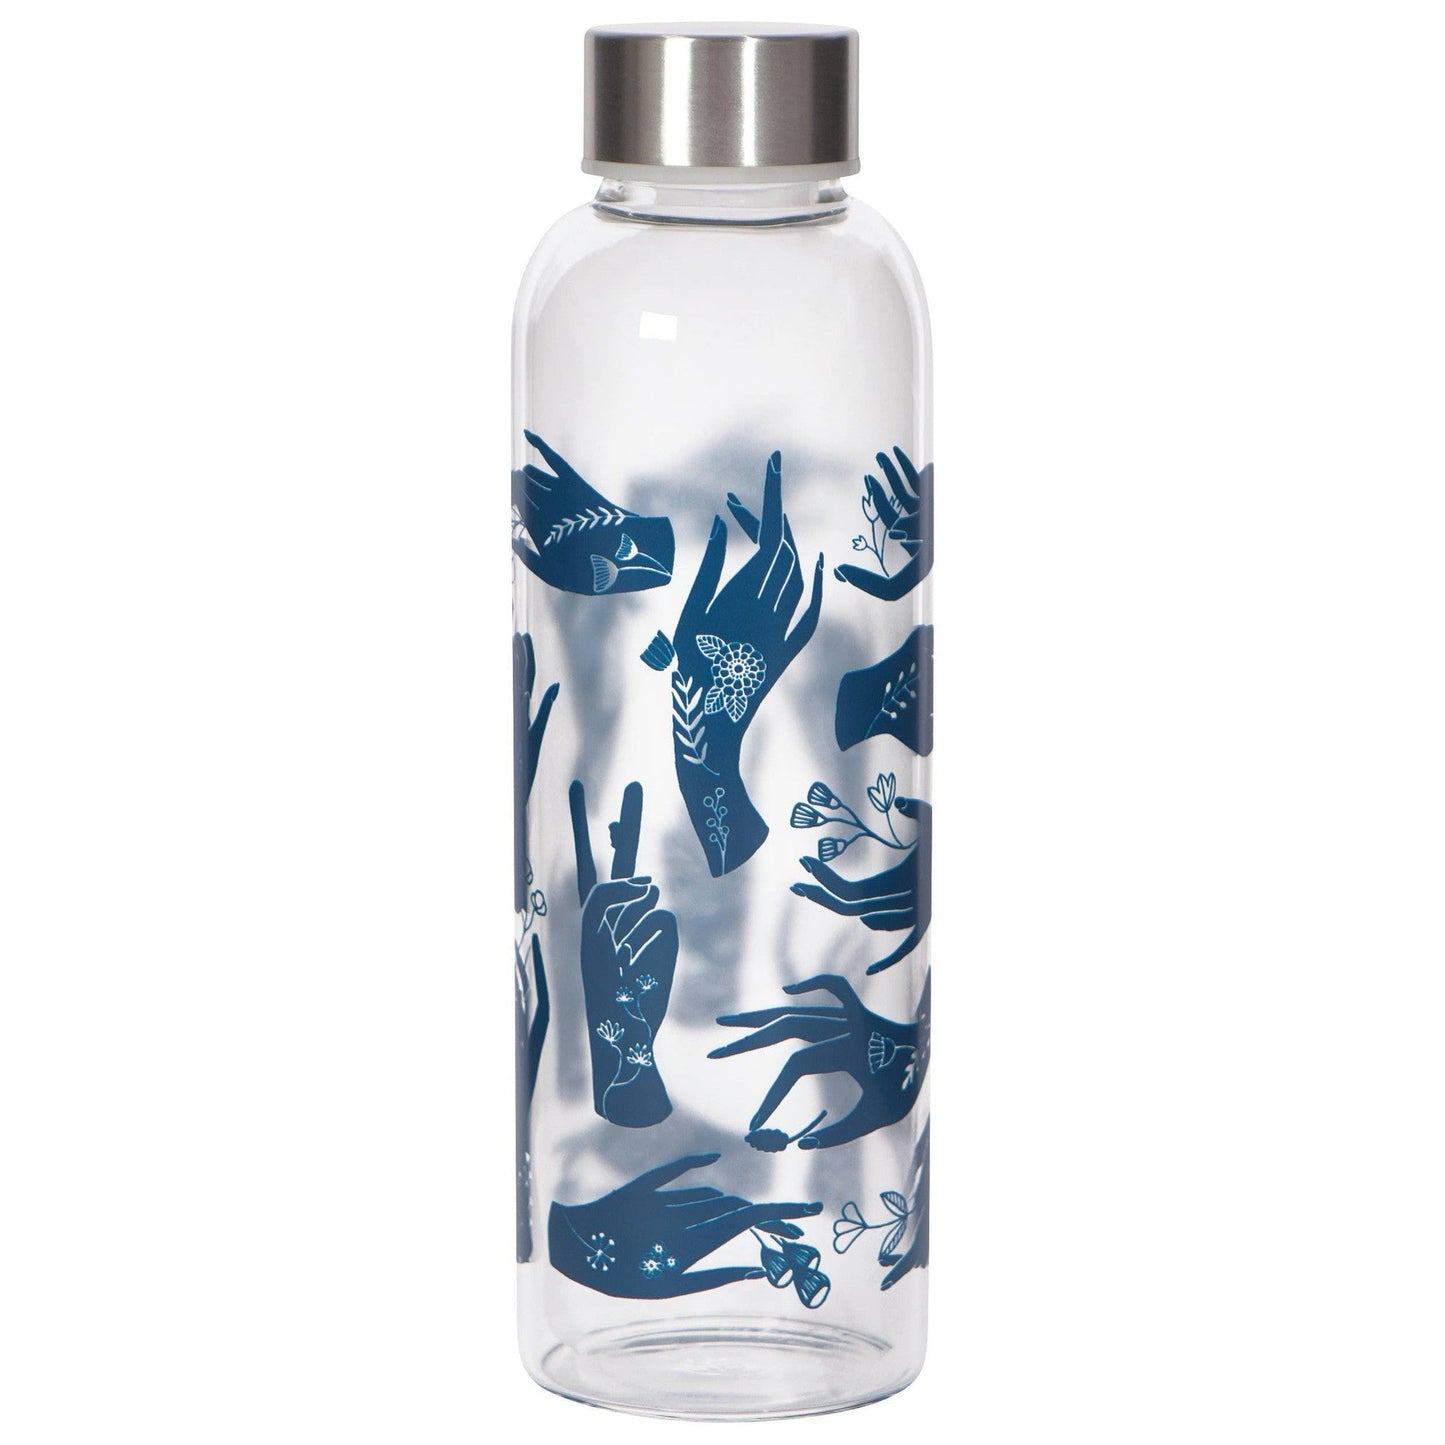 Show Of Hands Sustain Glass Water Bottle | Eco-friendly Reusable Drinkware